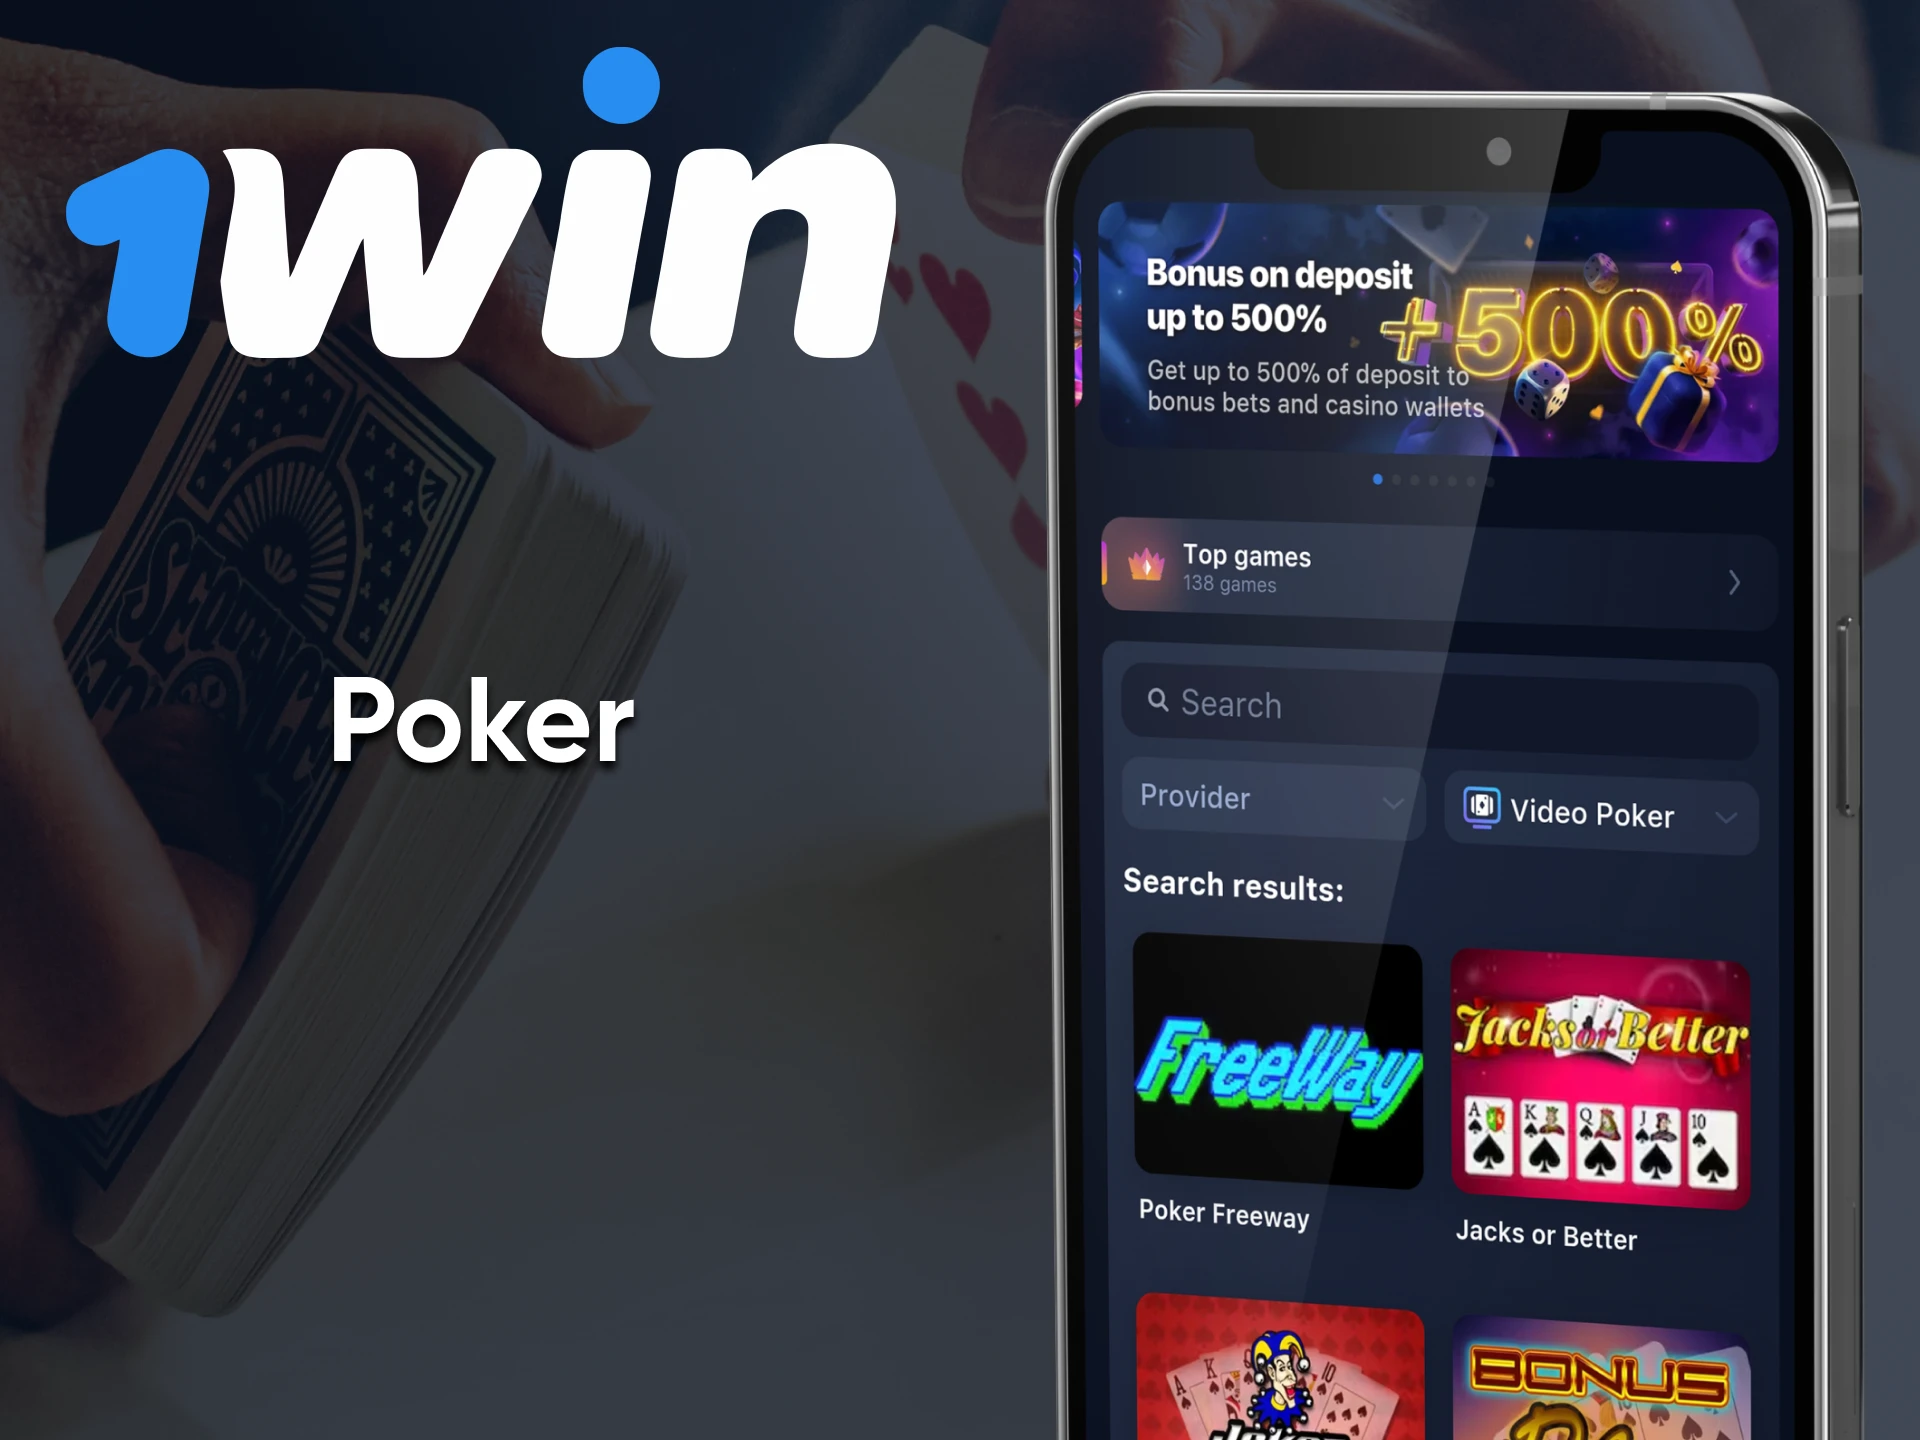 On the 1win service you can play in the Poker.